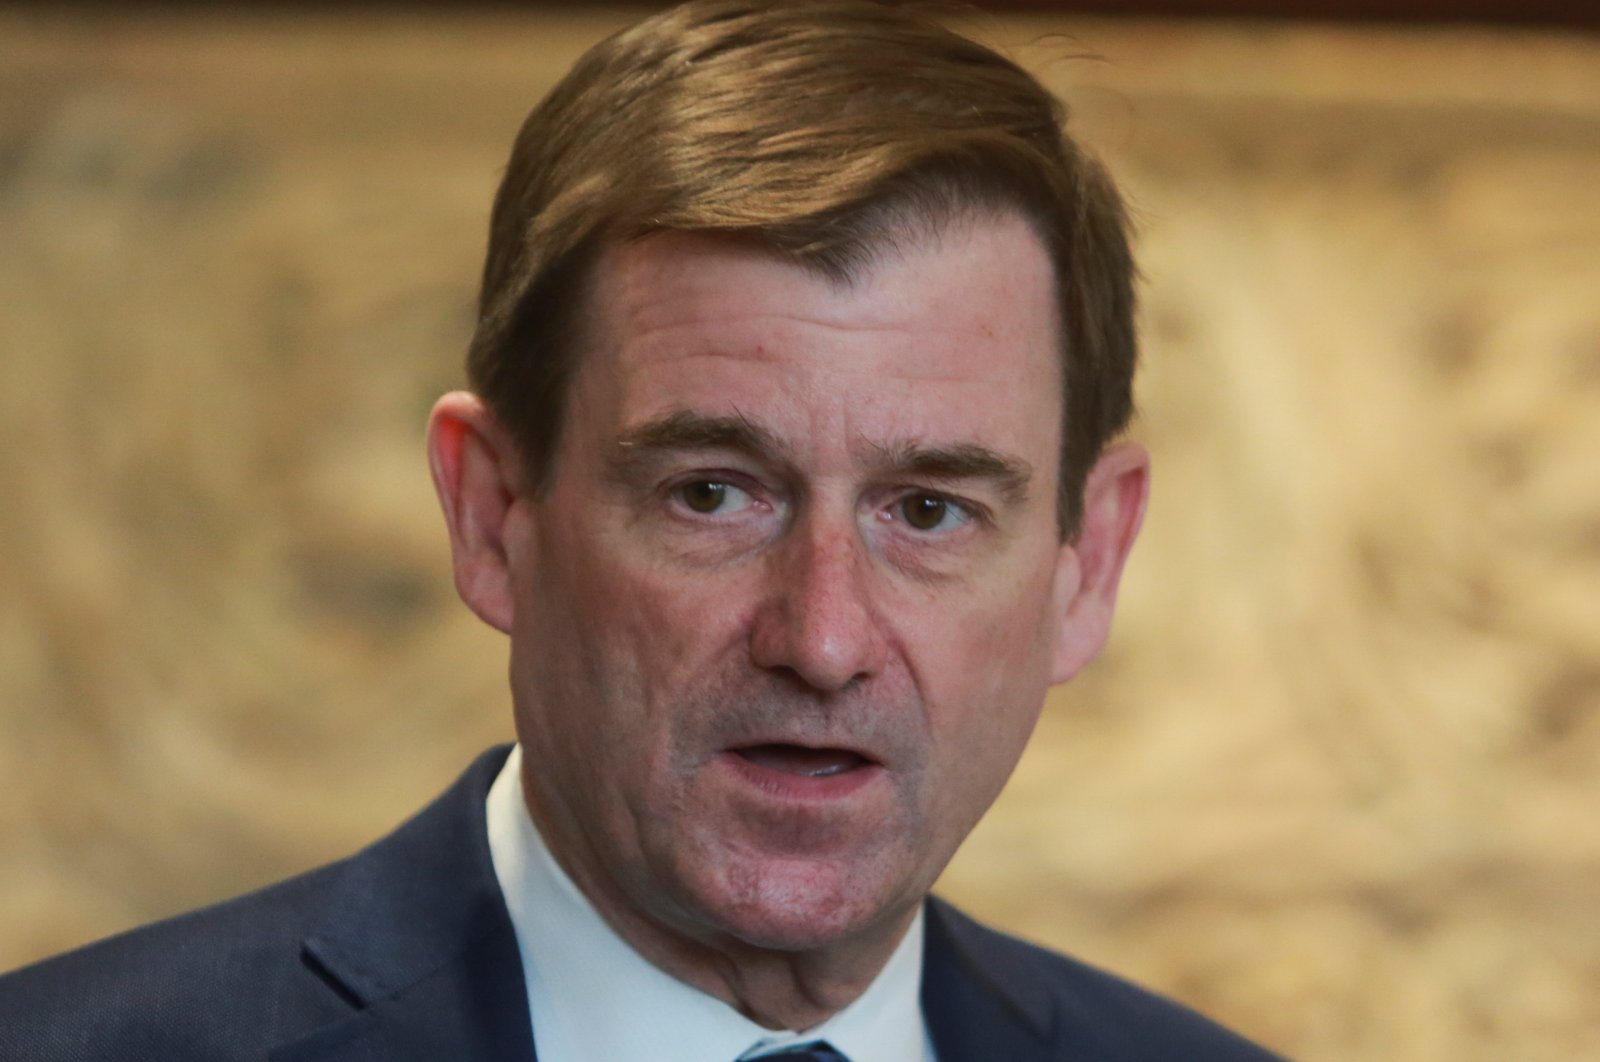 U.S. Under Secretary of State for Political Affairs David Hale speaks after a meeting with Lebanese Parliament Speaker Nabih Berri in Beirut, Lebanon, April 14, 2021. (Reuters Photo)